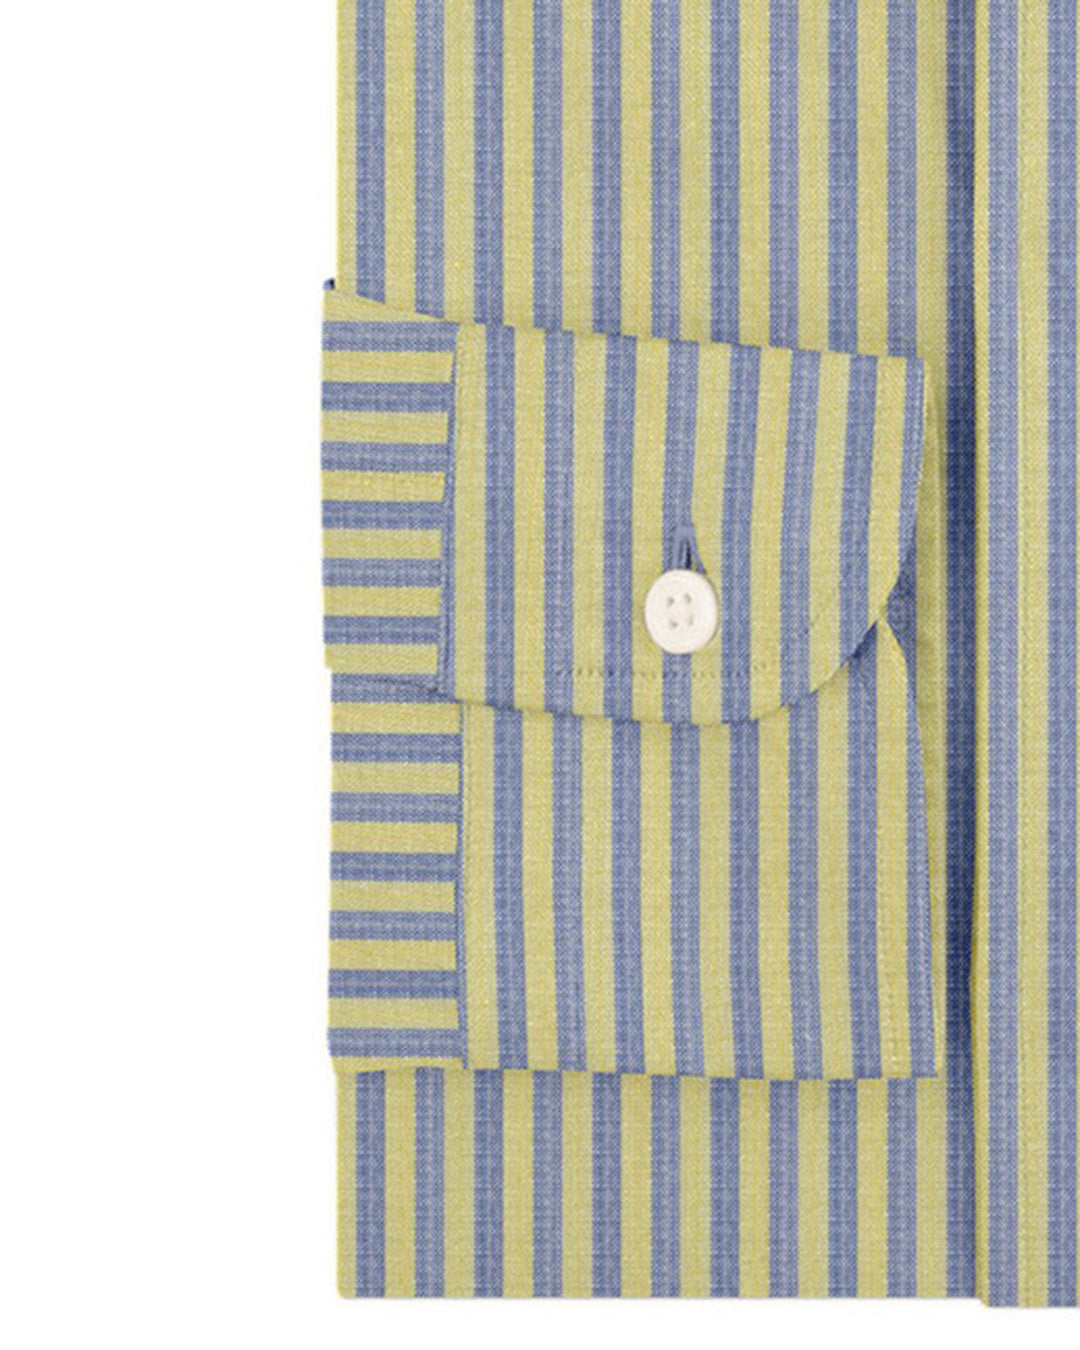 Cuff of custom linen shirt for men in yellow and blue dress stripes